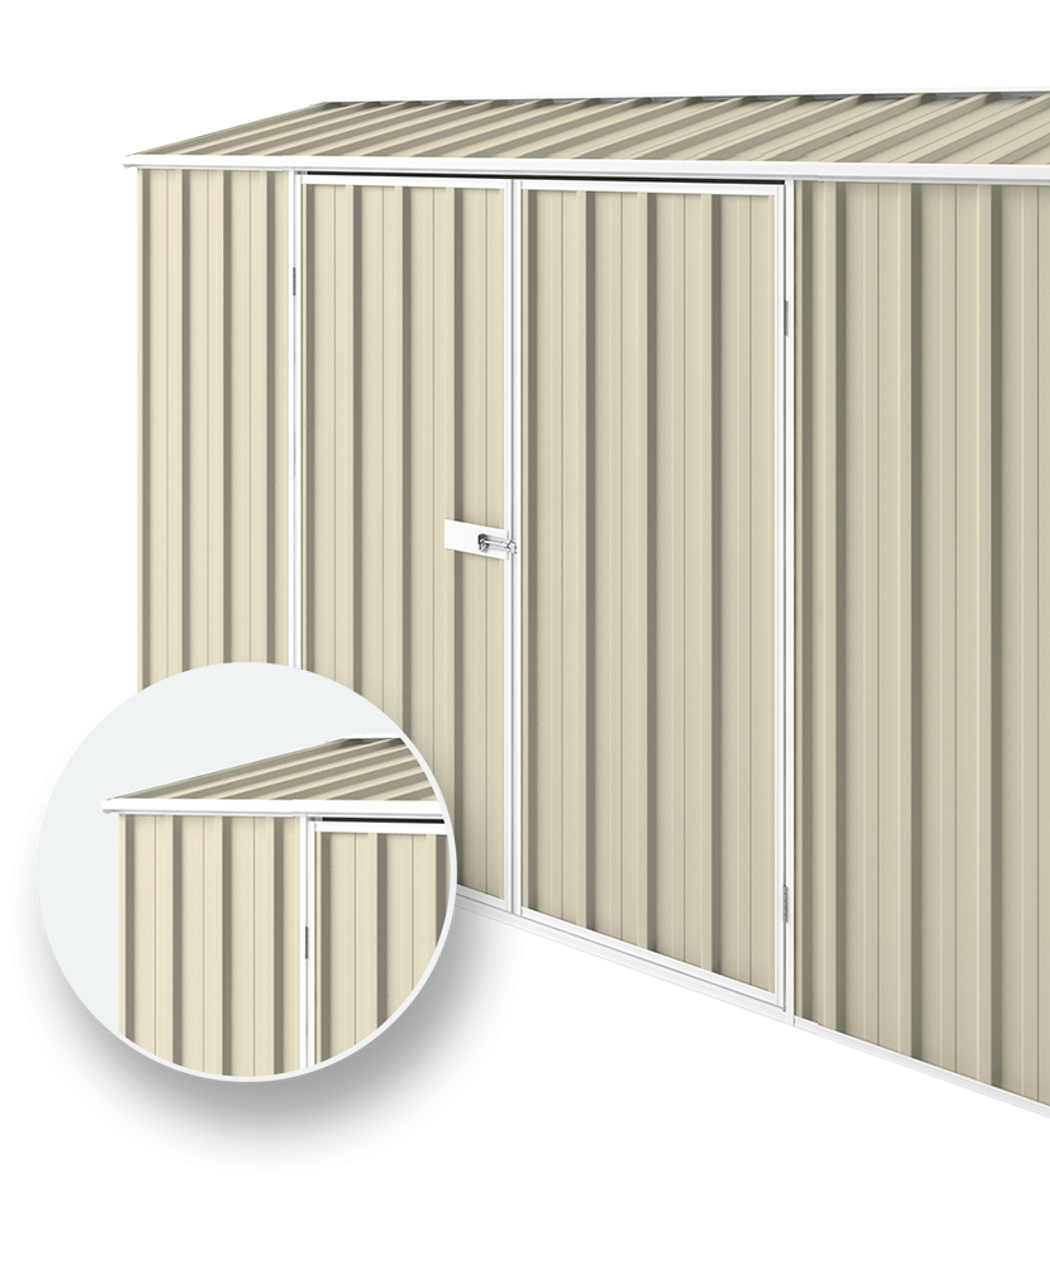 Gable Roof Garden Shed 3m (w) x 3m (d) - Classic